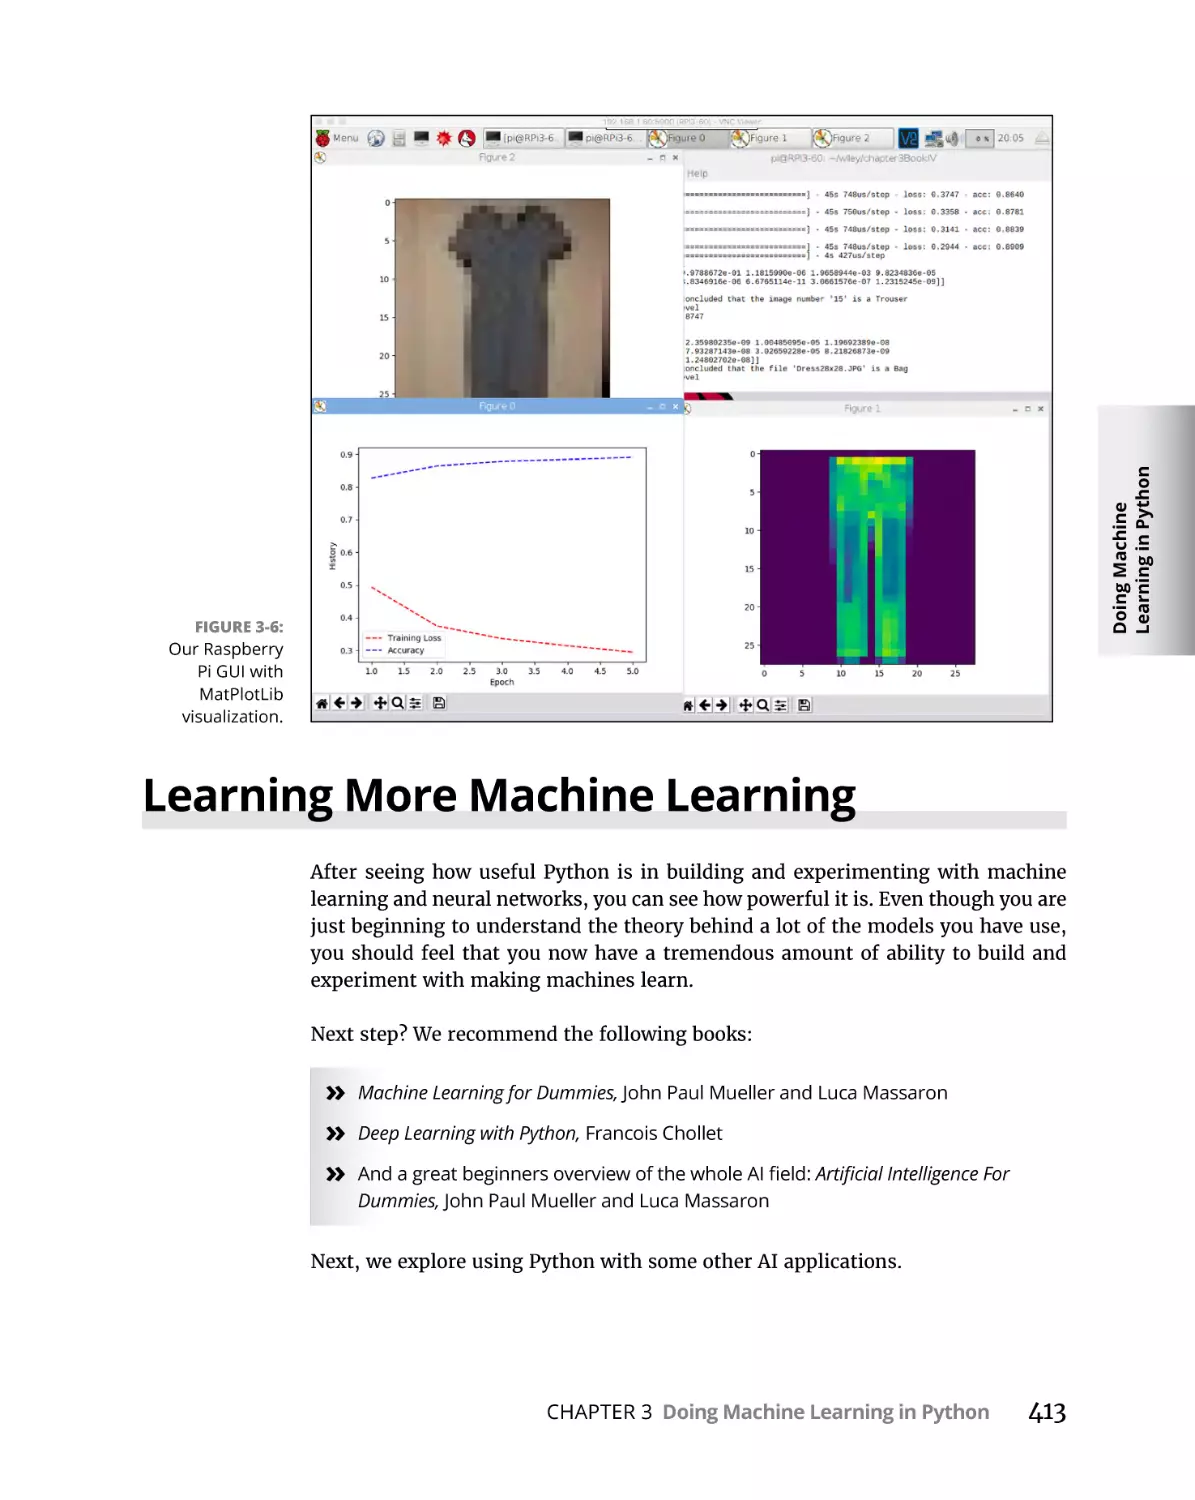 Learning More Machine Learning